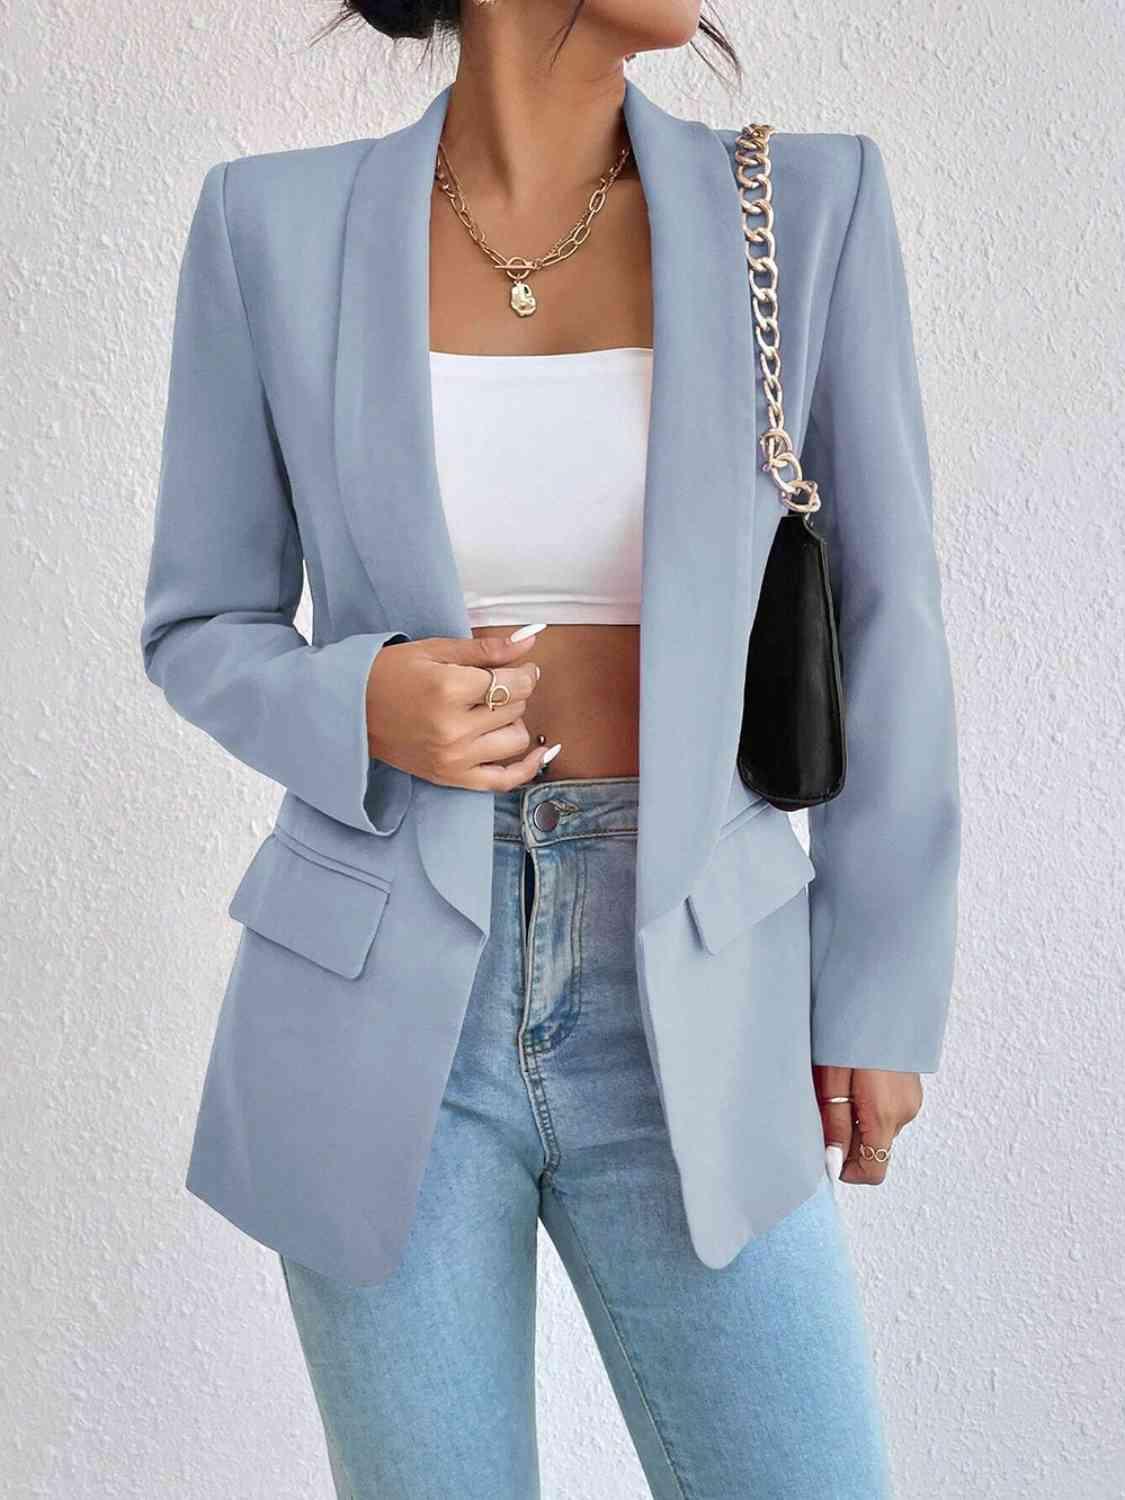 a woman wearing a light blue blazer and jeans